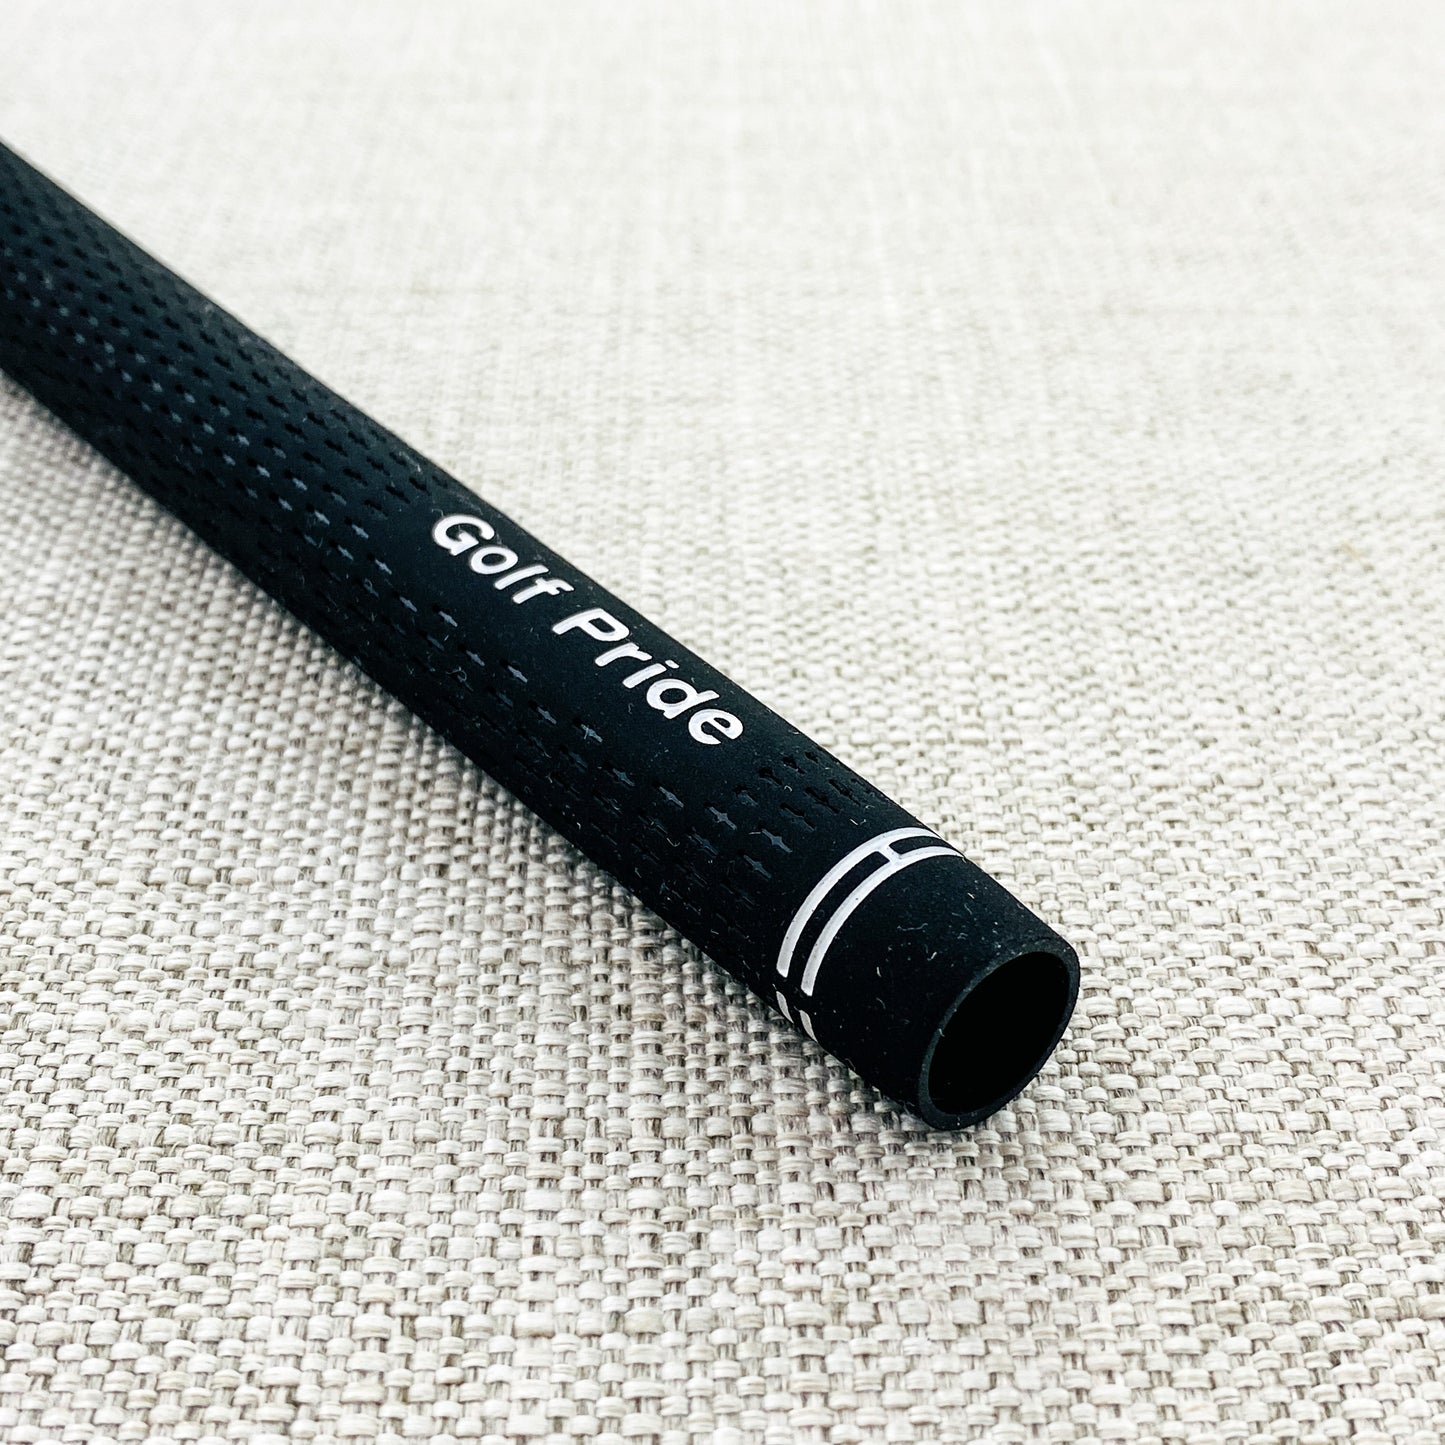 Golf Pride Tour Velvet swing grip. Choice of size. Black - Price includes fitment.